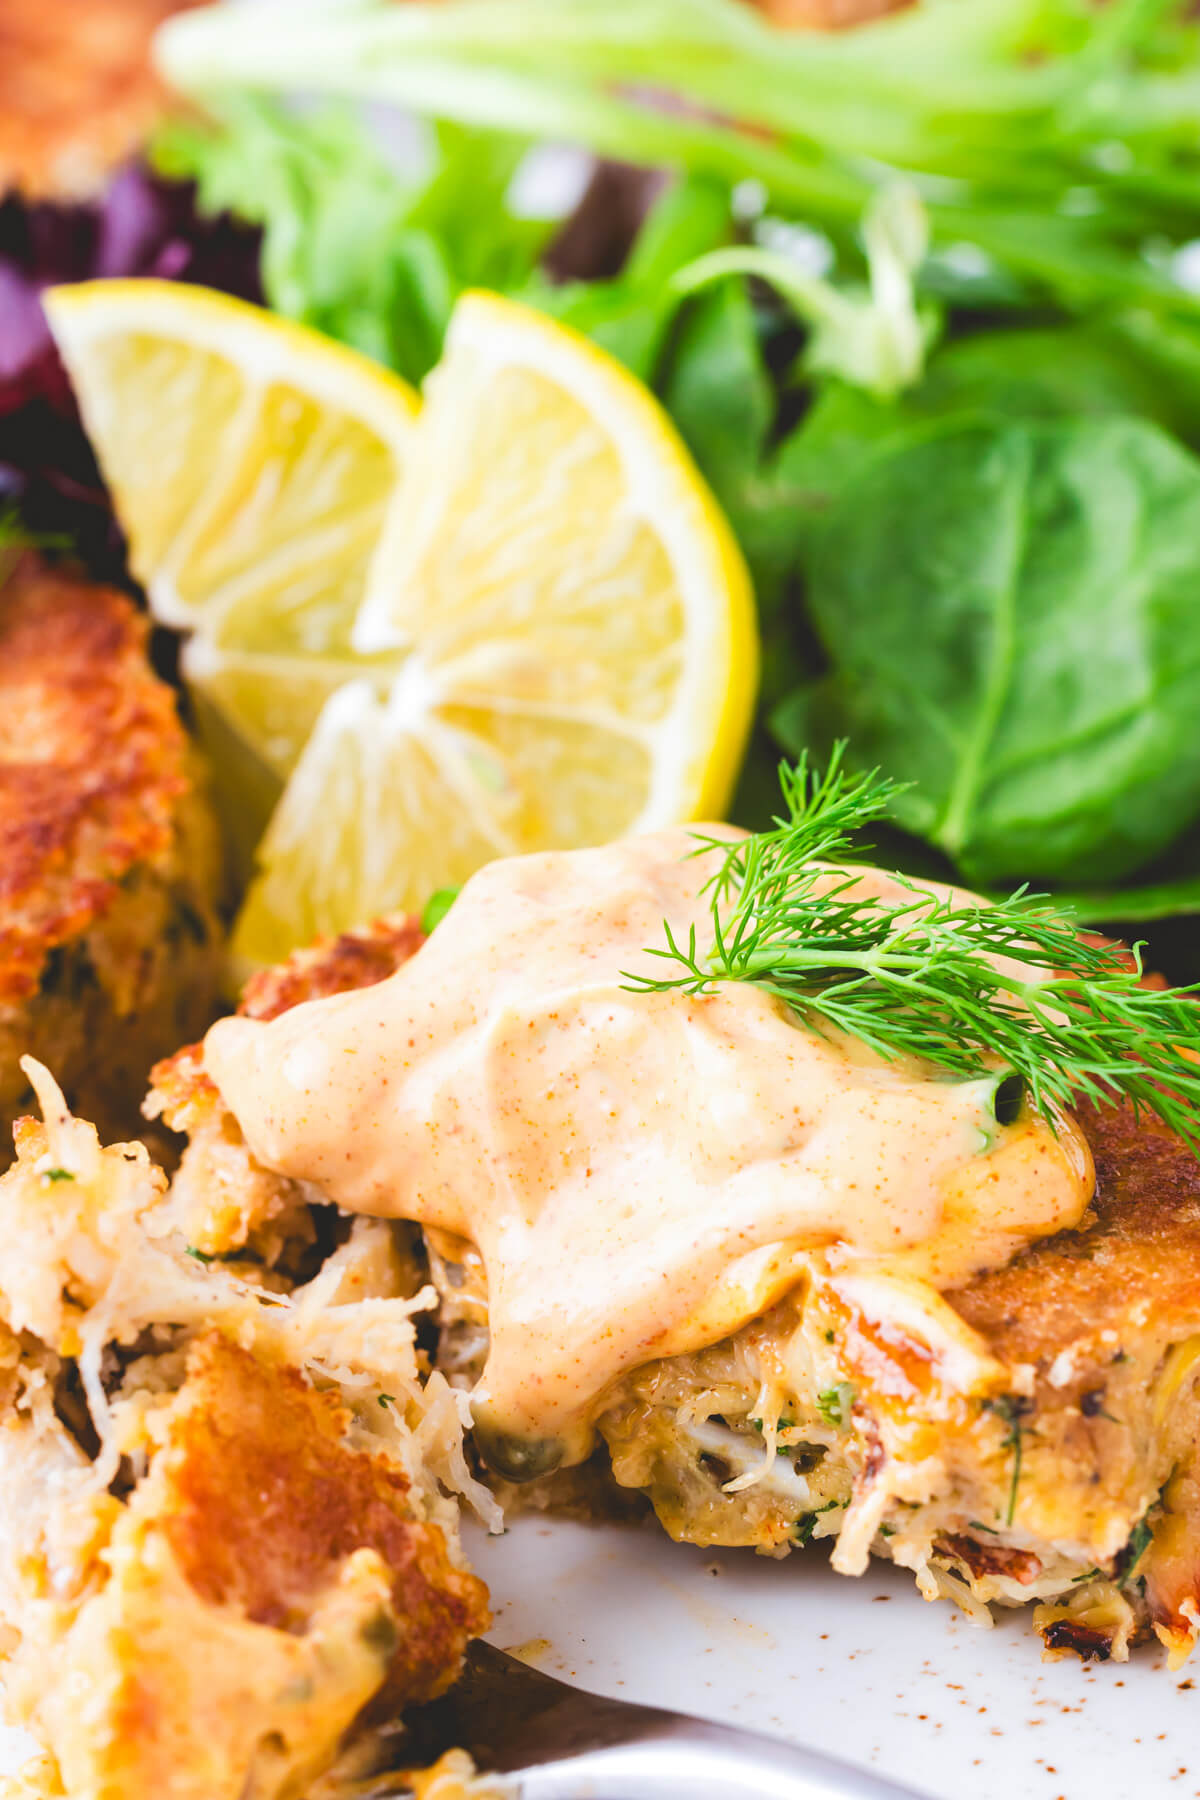 Crab Cakes topped with Cajun aioli served with lemon wedges and fresh greens.
